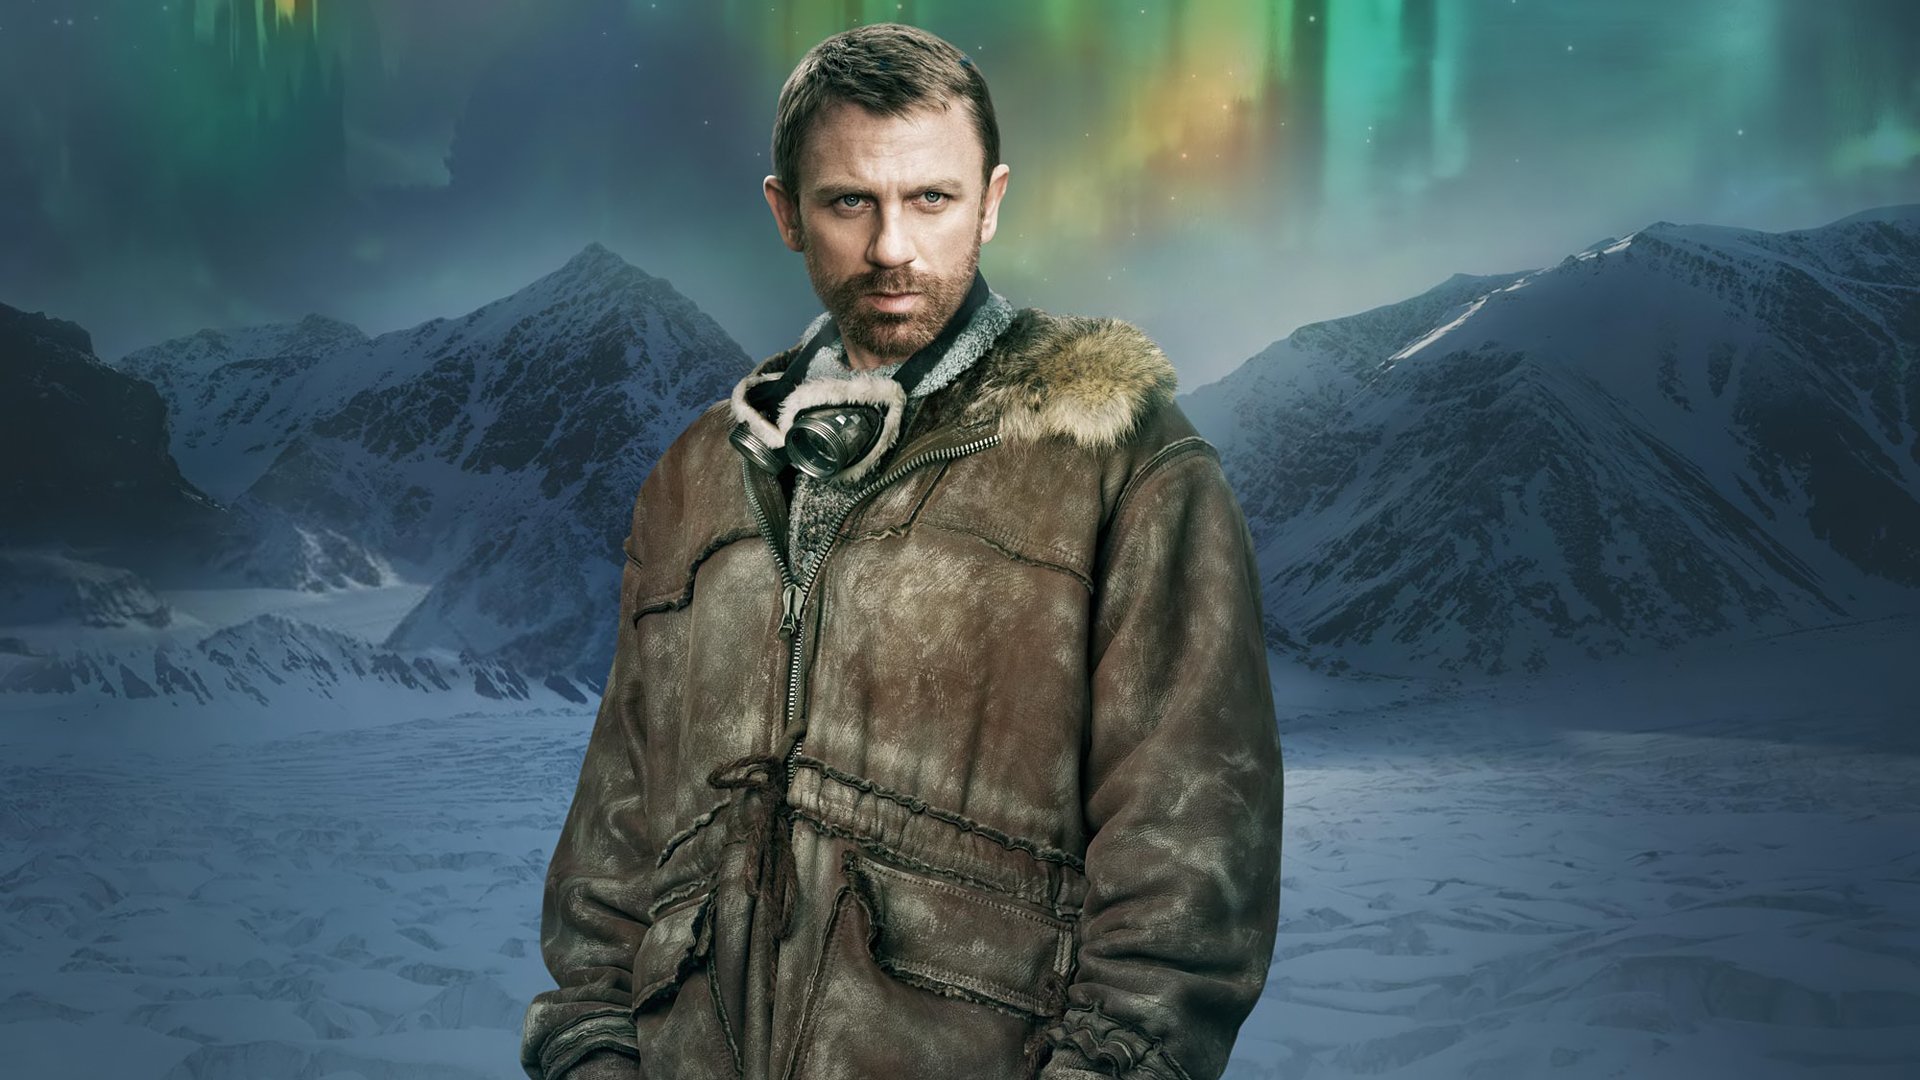 the golden compass 2 full movie online free